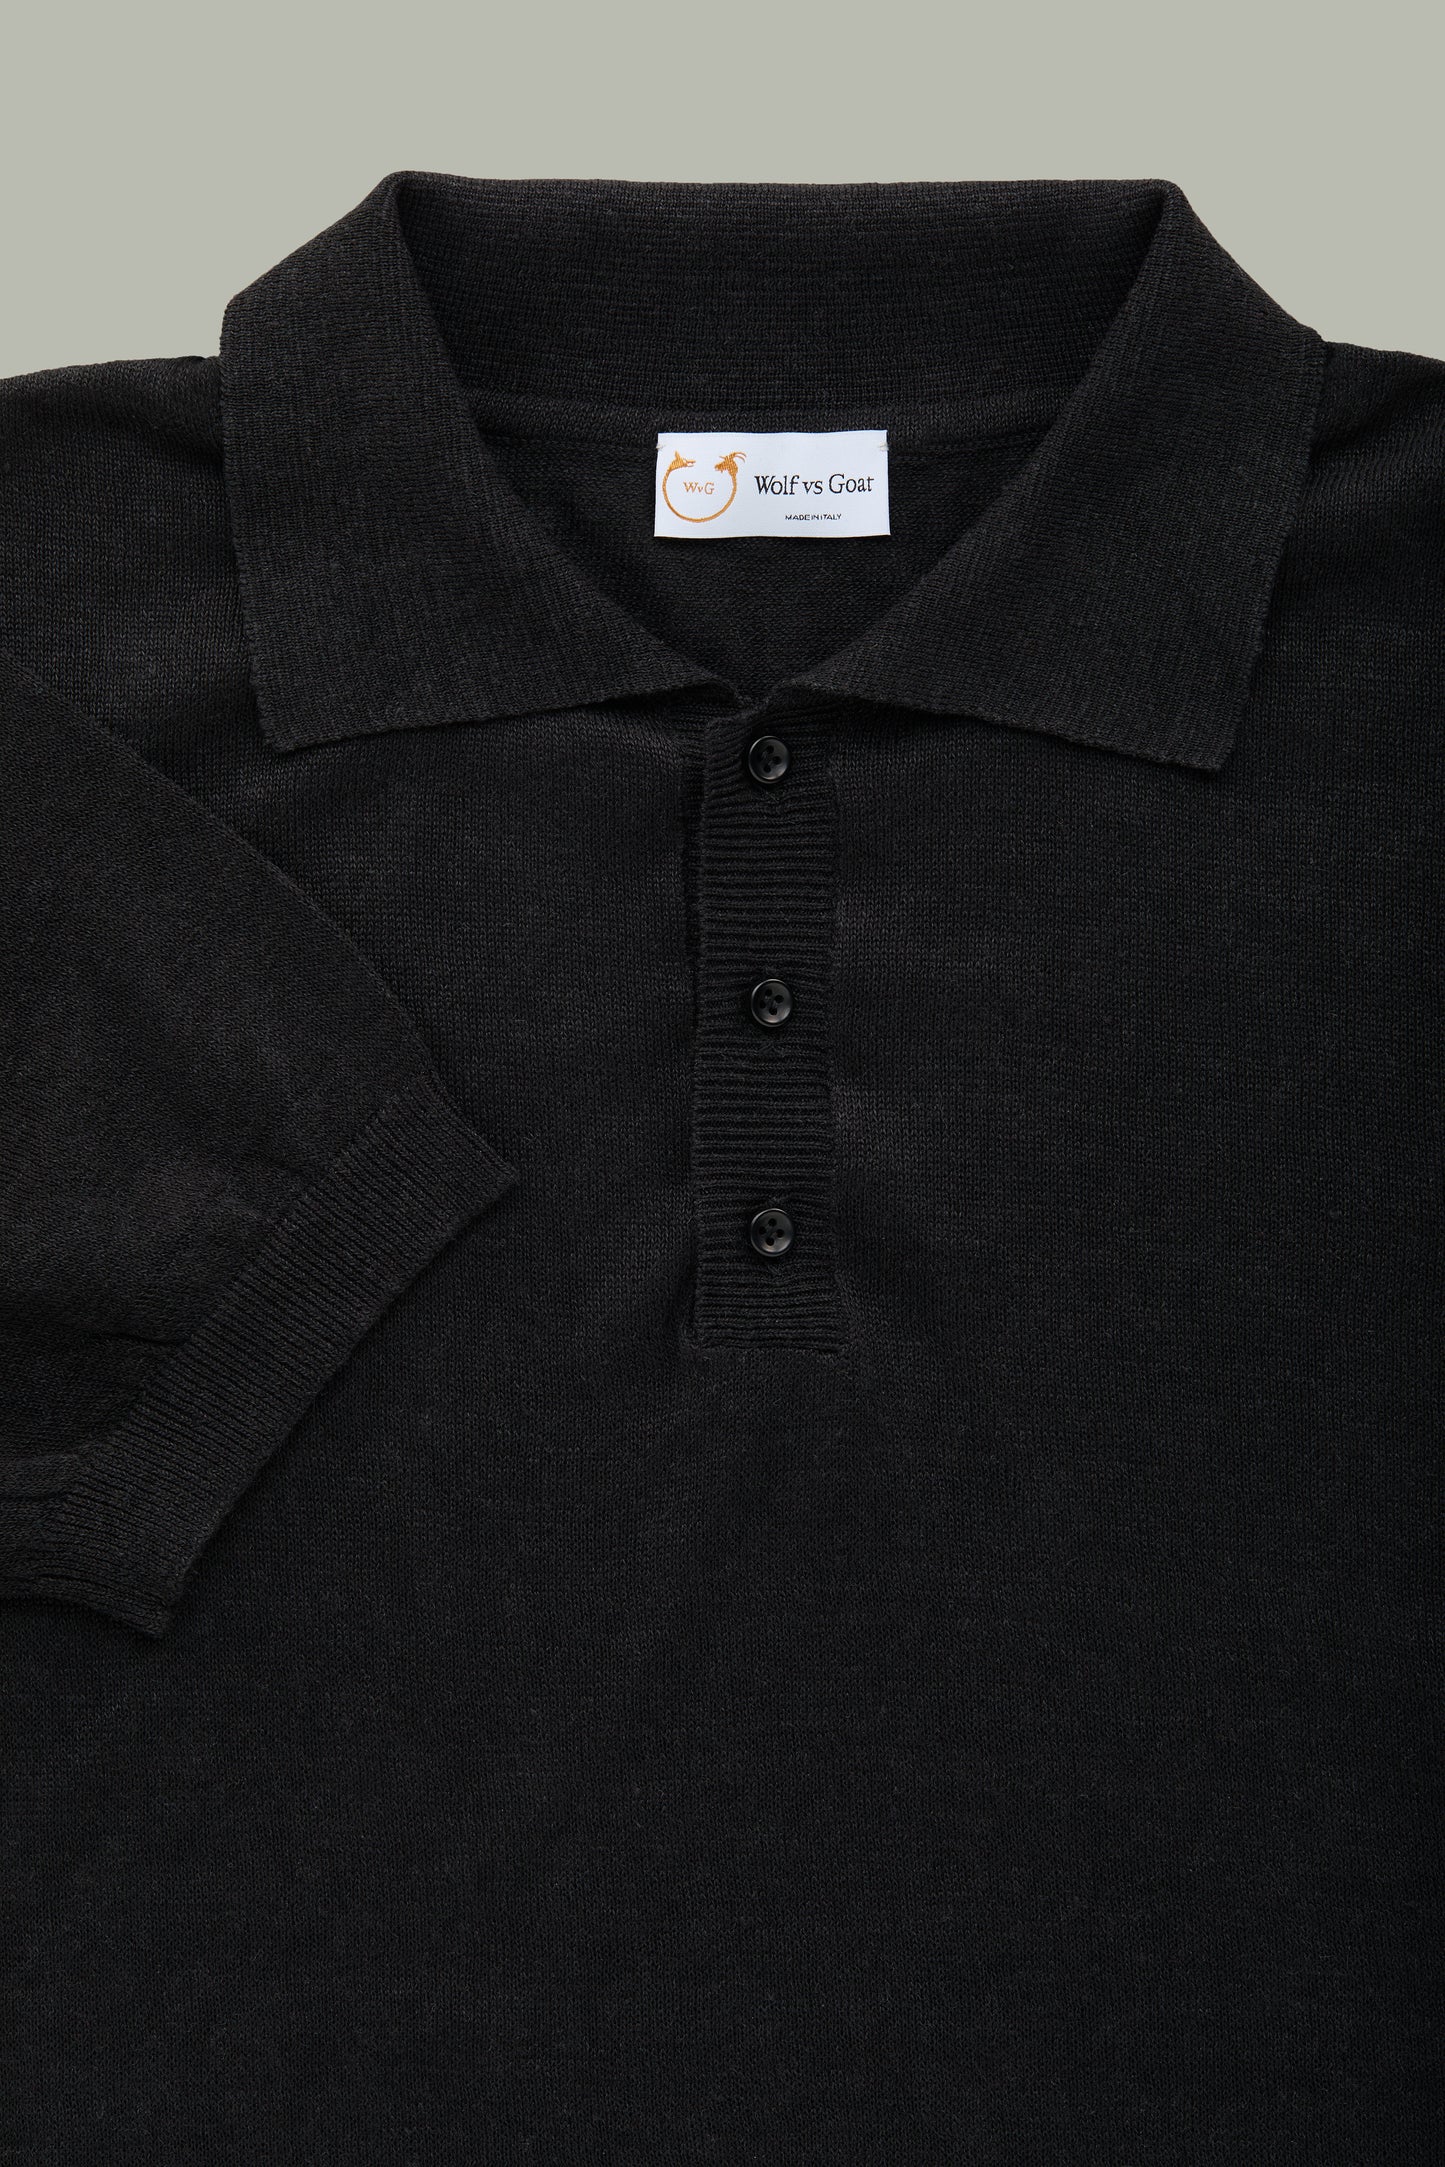 Short Sleeve Linen Cotton Knitted Polo Black